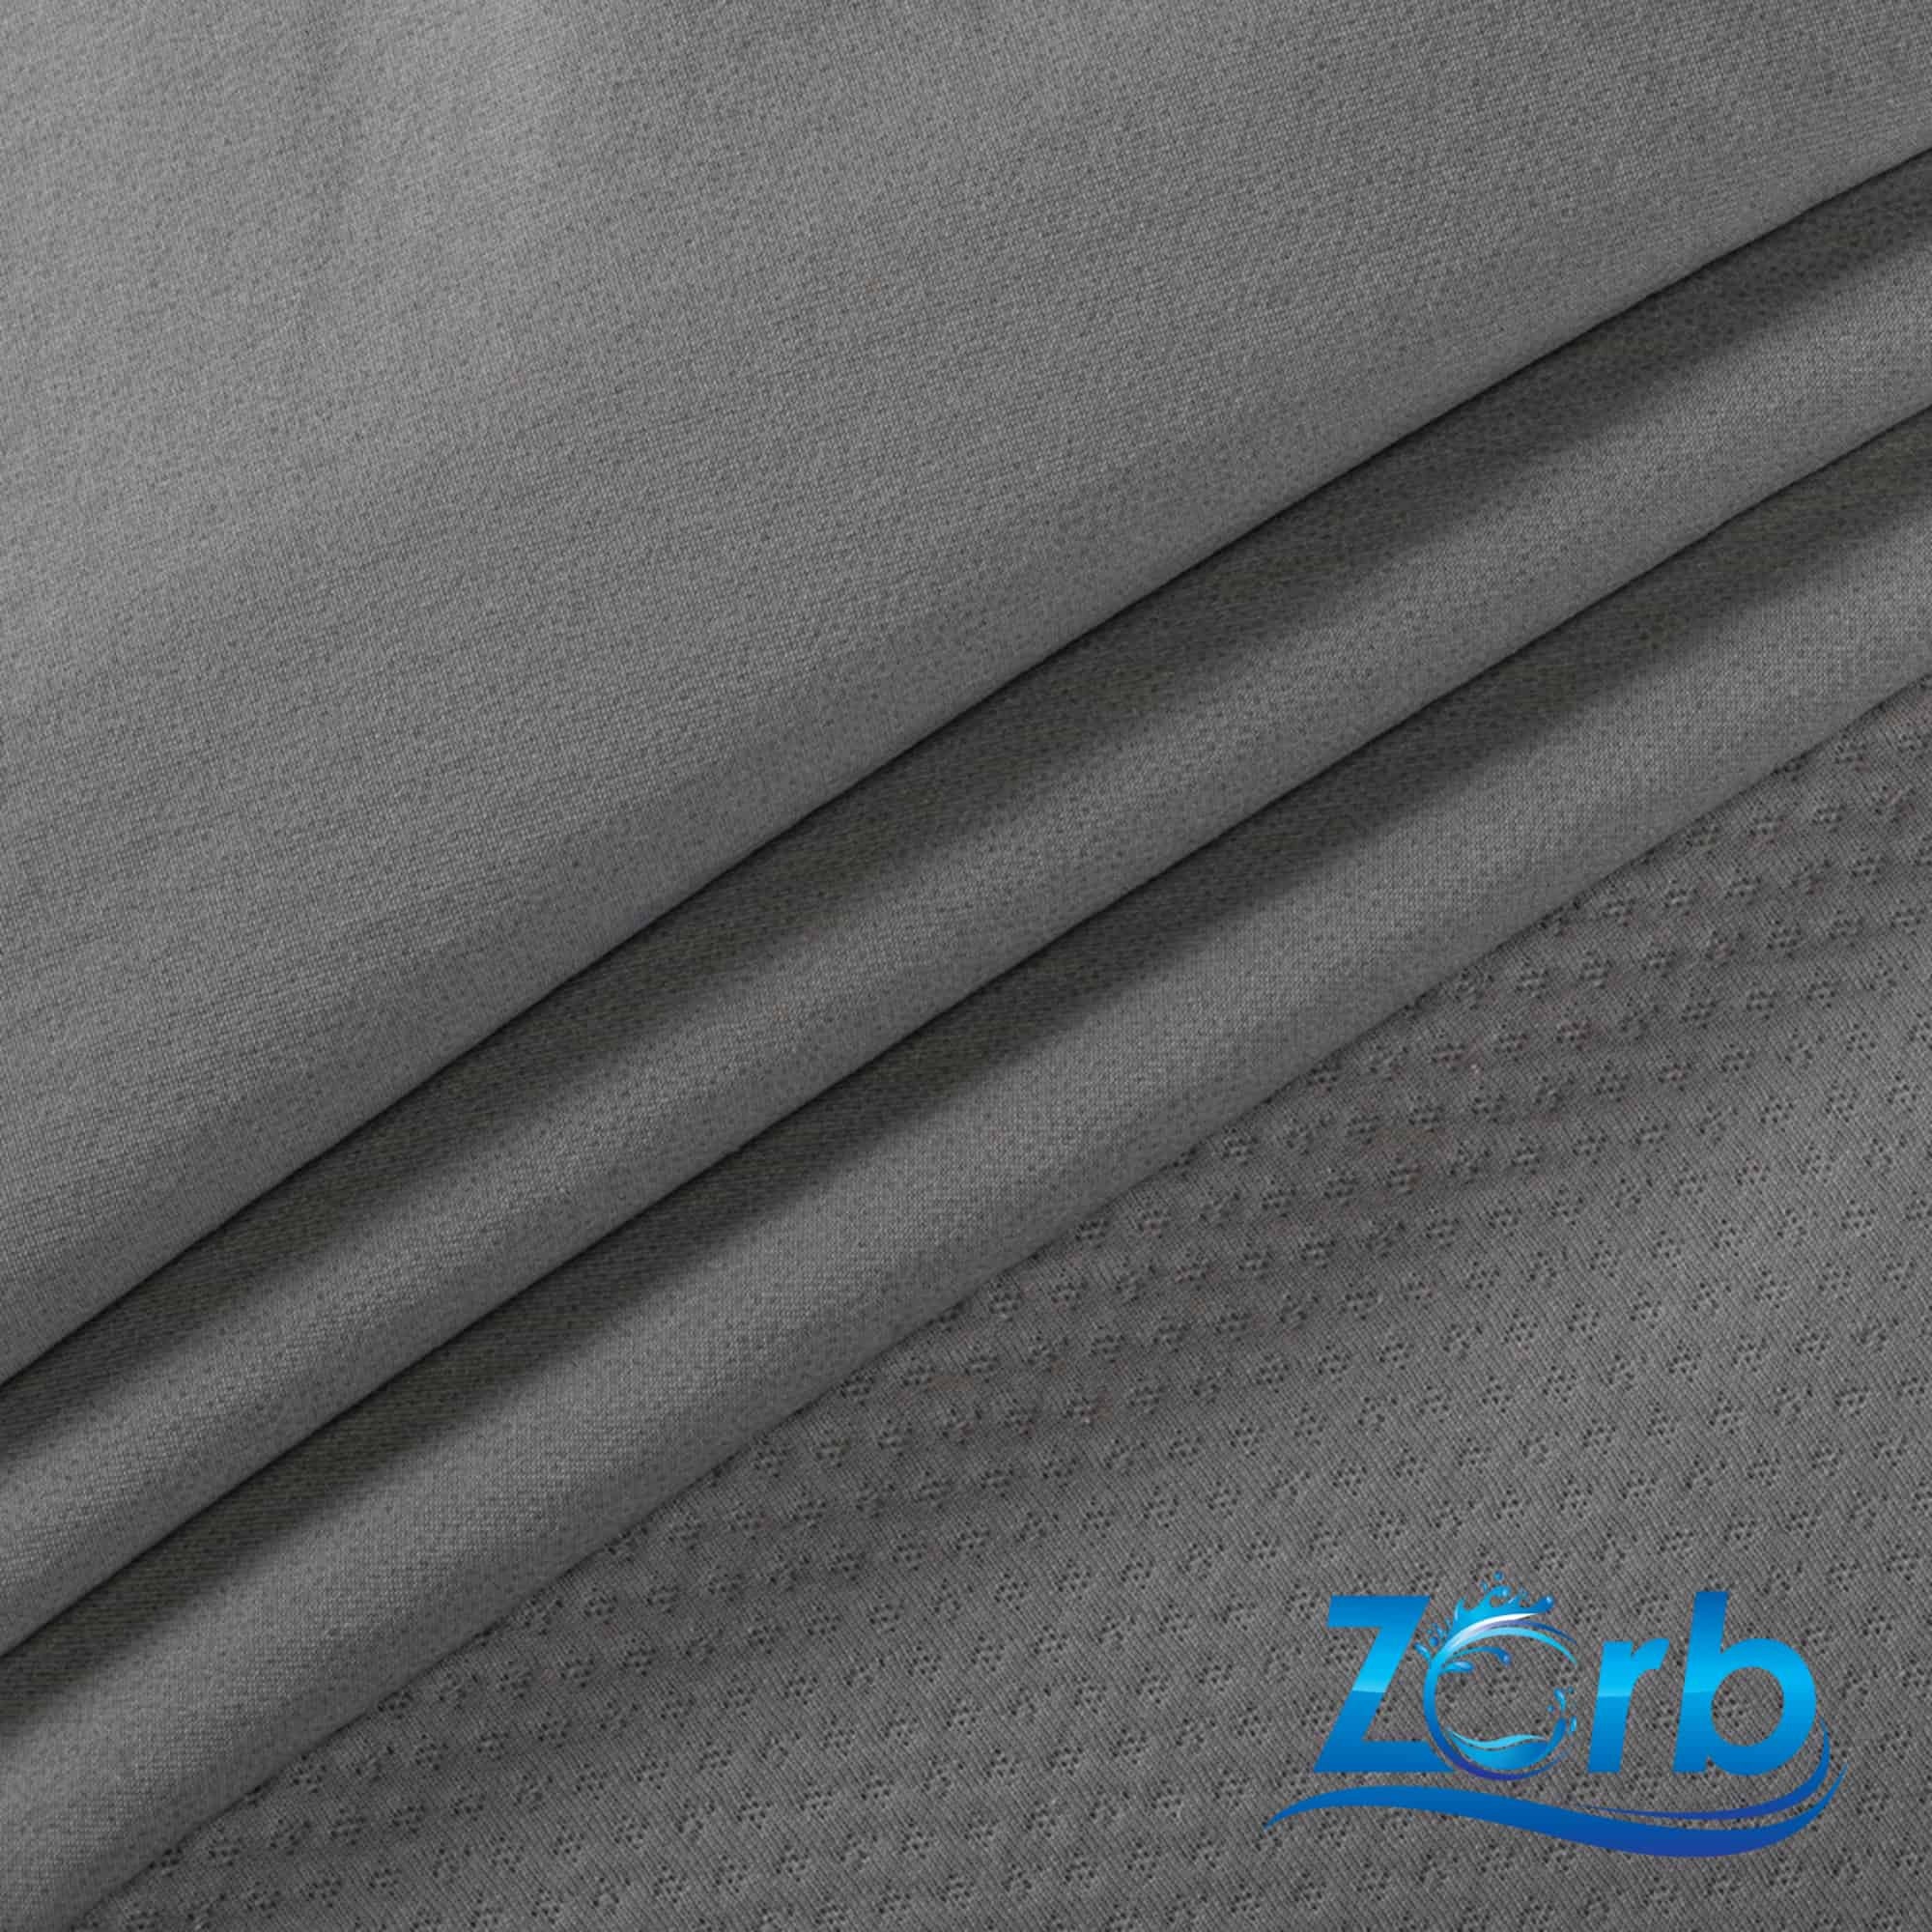 V2 Zorb® 4D 100% Organic Cotton Dimple Waterproof CORE Eco-pul Soaker Fabric  W-626 W-619 made in USA, Sold by the Yard 